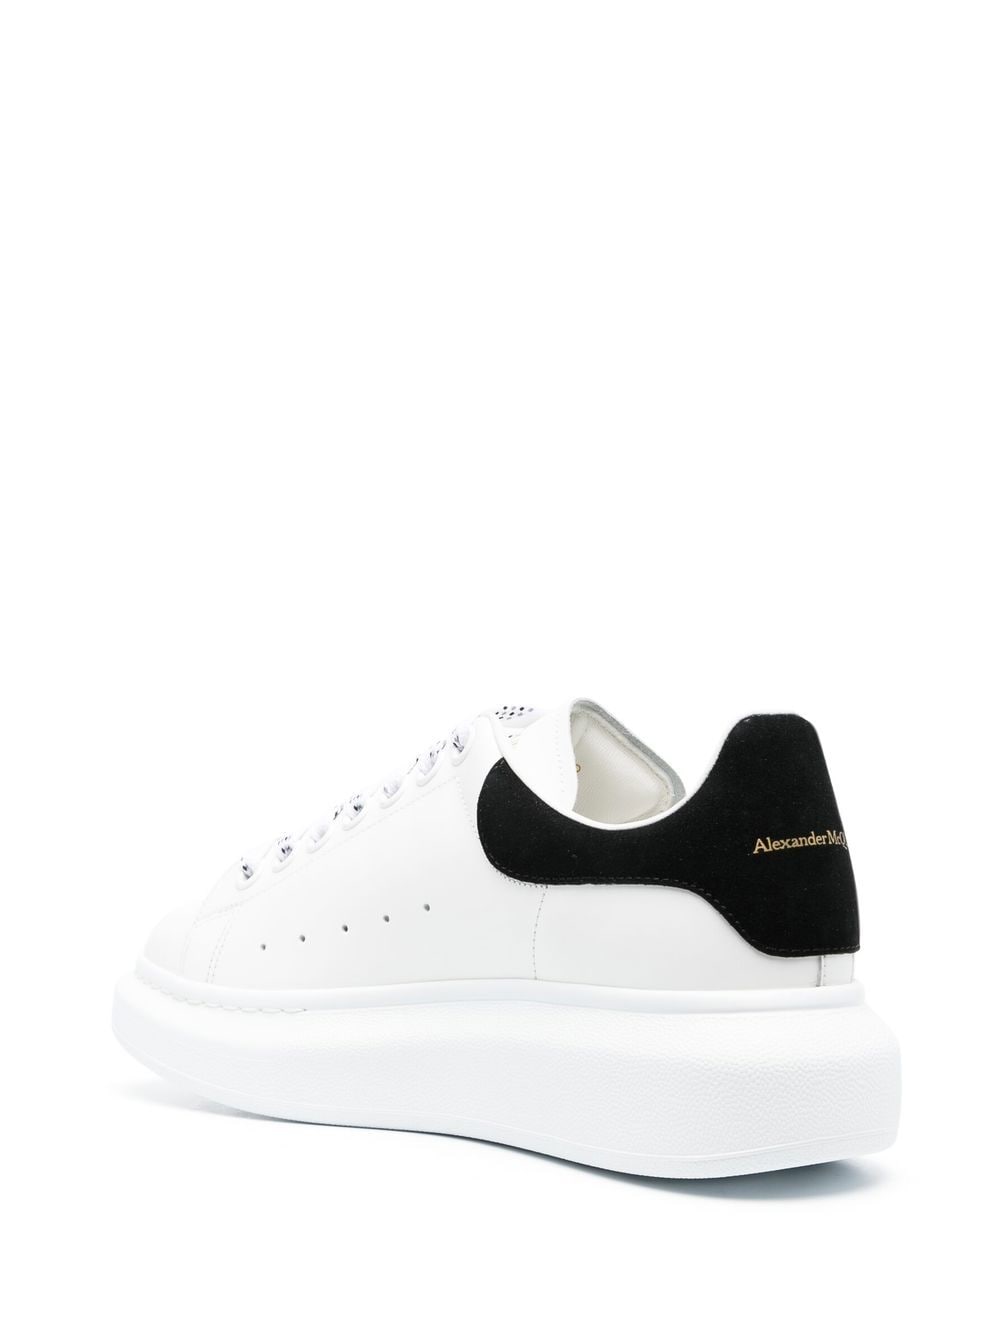 ALEXANDER MCQUEEN Contrasting Suede Women's Sneakers with Thick Sole